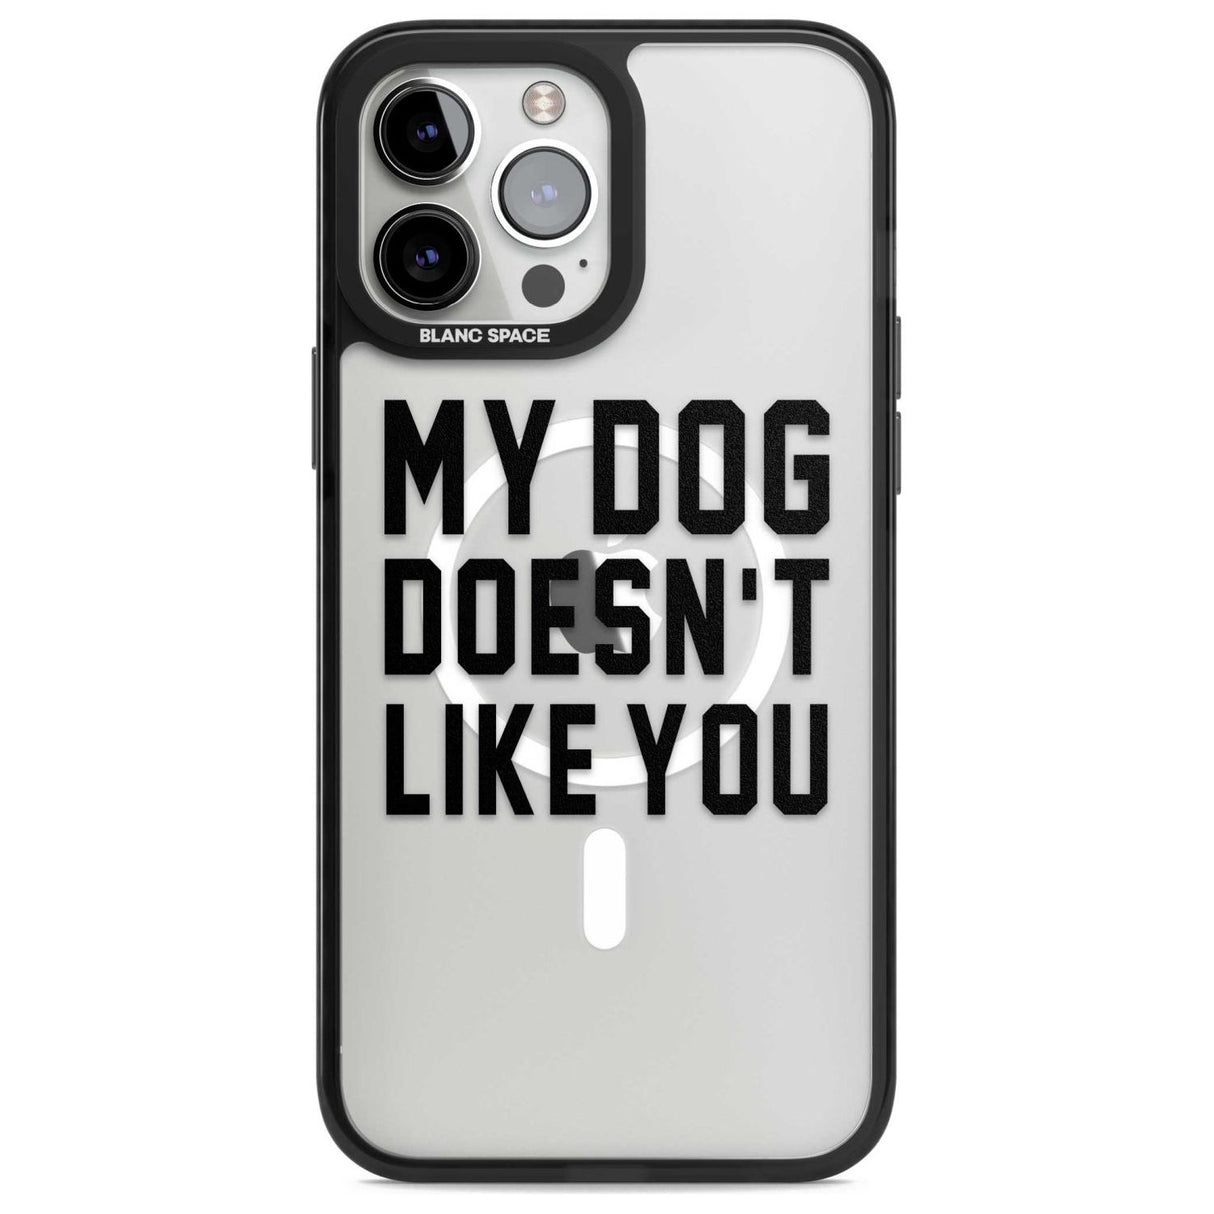 Dog Doesn't Like You Phone Case iPhone 13 Pro Max / Magsafe Black Impact Case Blanc Space